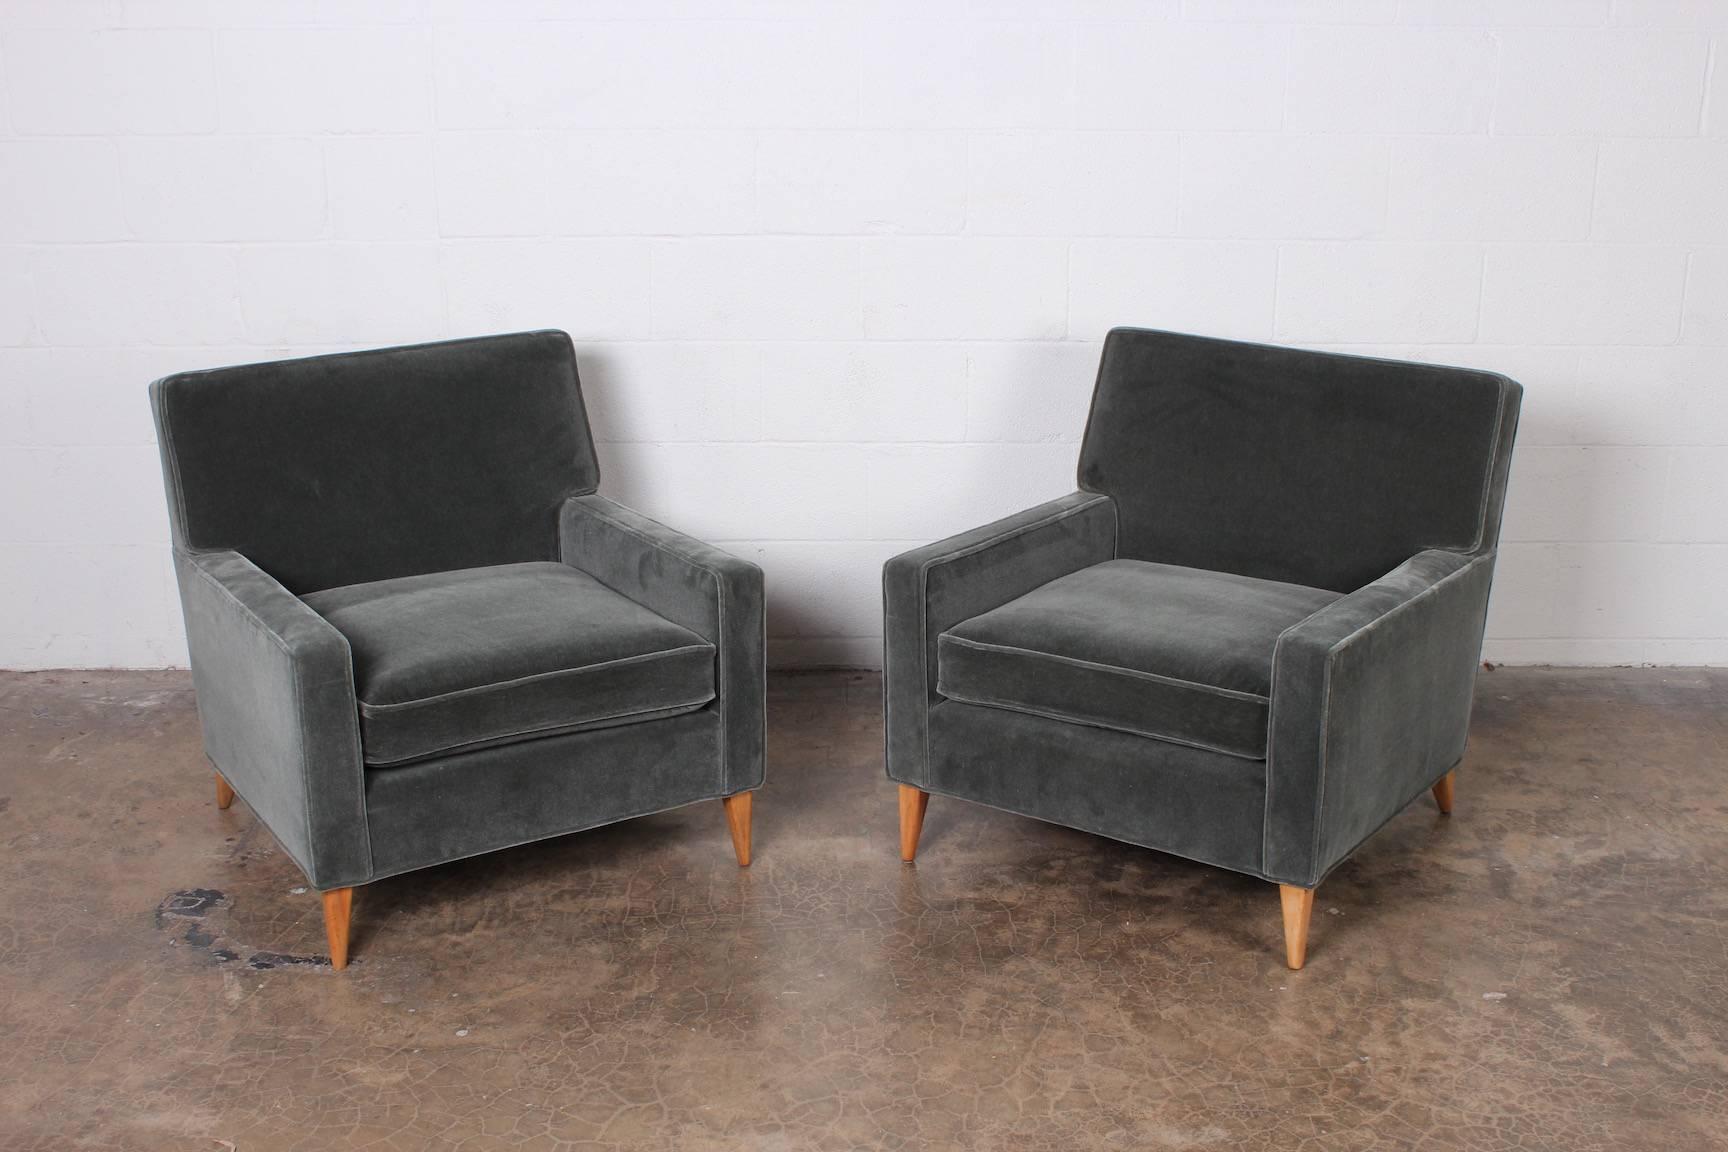 A pair of lounge chairs with maple legs designed by Paul McCobb for Custom Craft. These have been fully restored and upholstered in mohair.